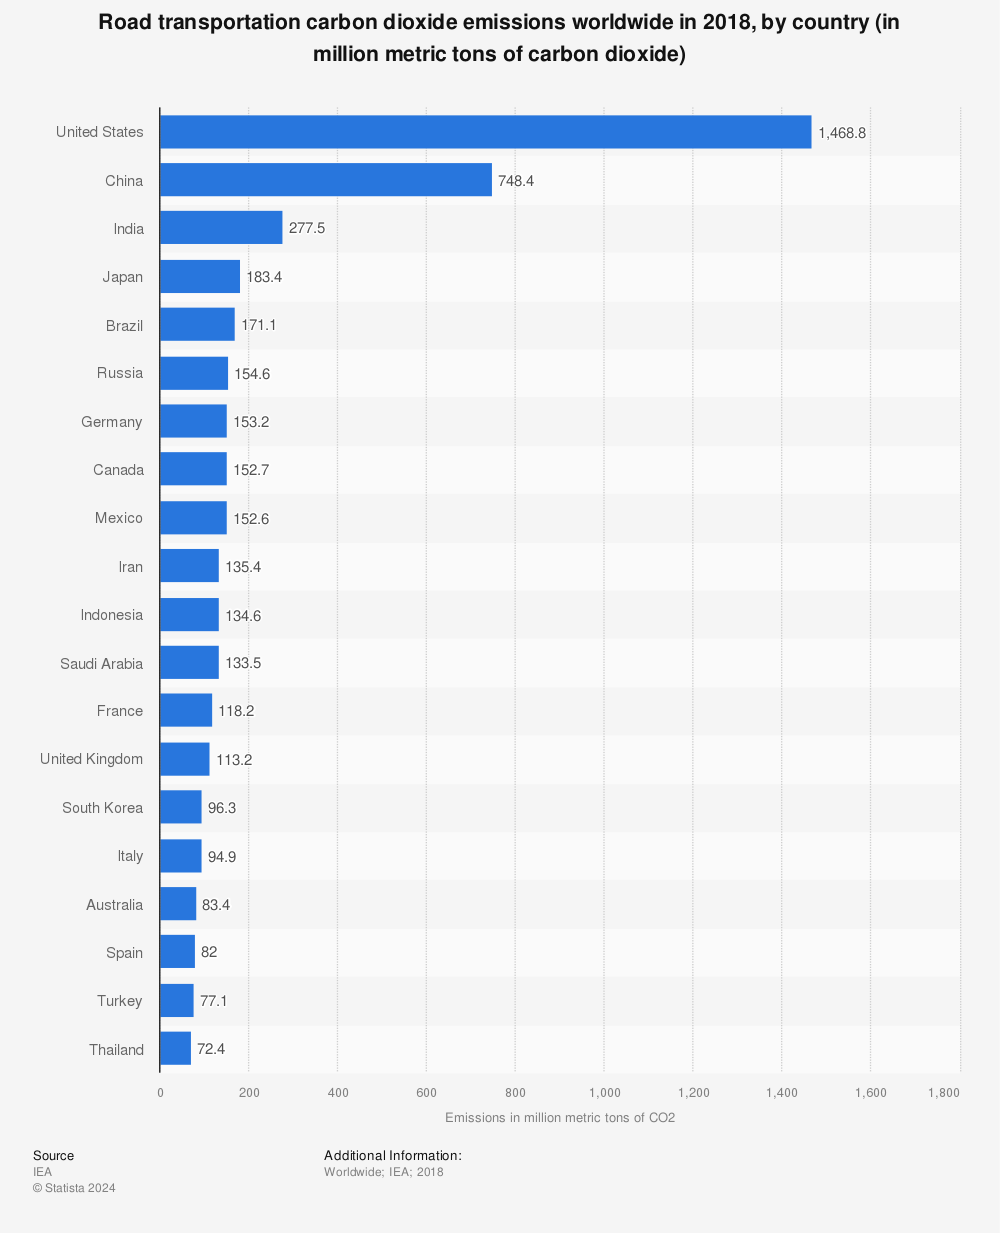 Statistic: Road transportation carbon dioxide emissions worldwide in 2018, by country (in million metric tons of carbon dioxide) | Statista